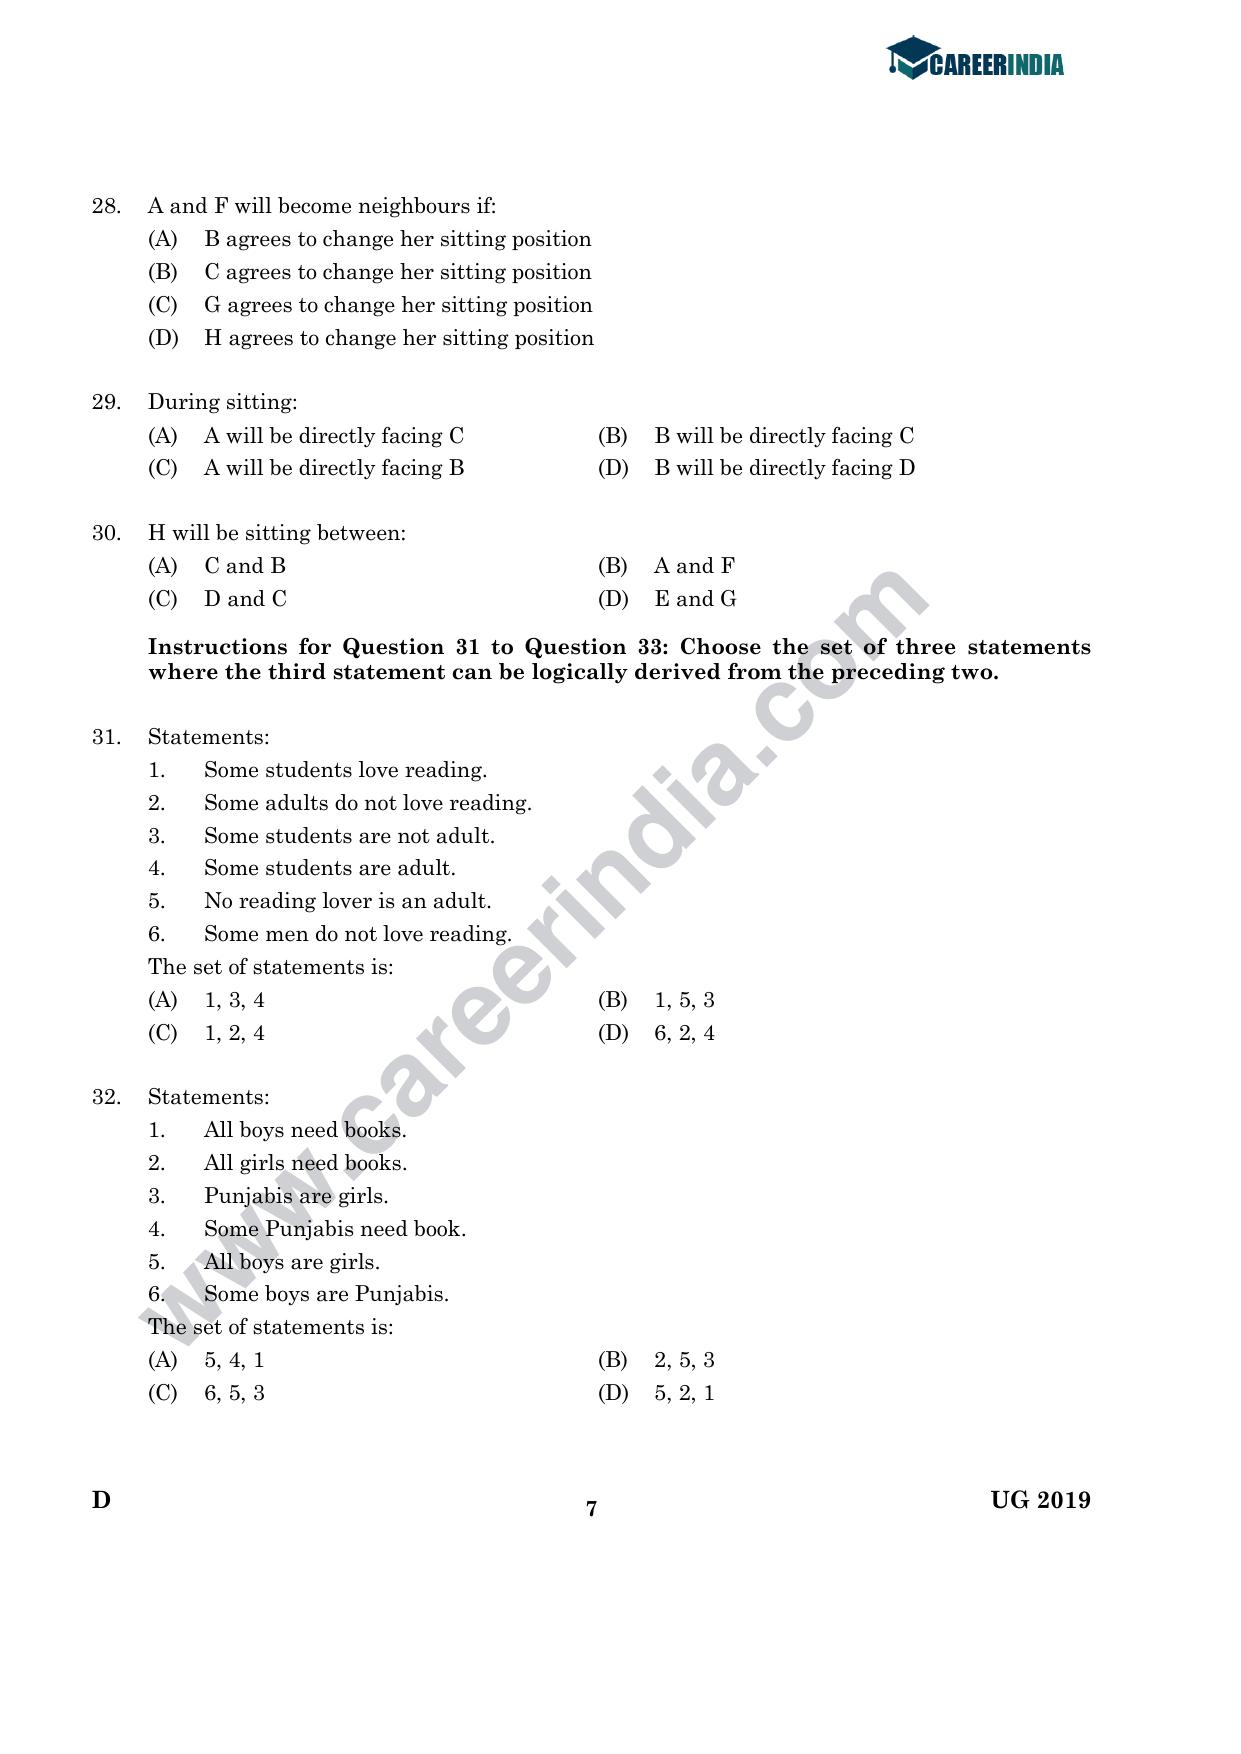 CLAT 2019 UG Logical-Reasoning Question Paper - Page 6